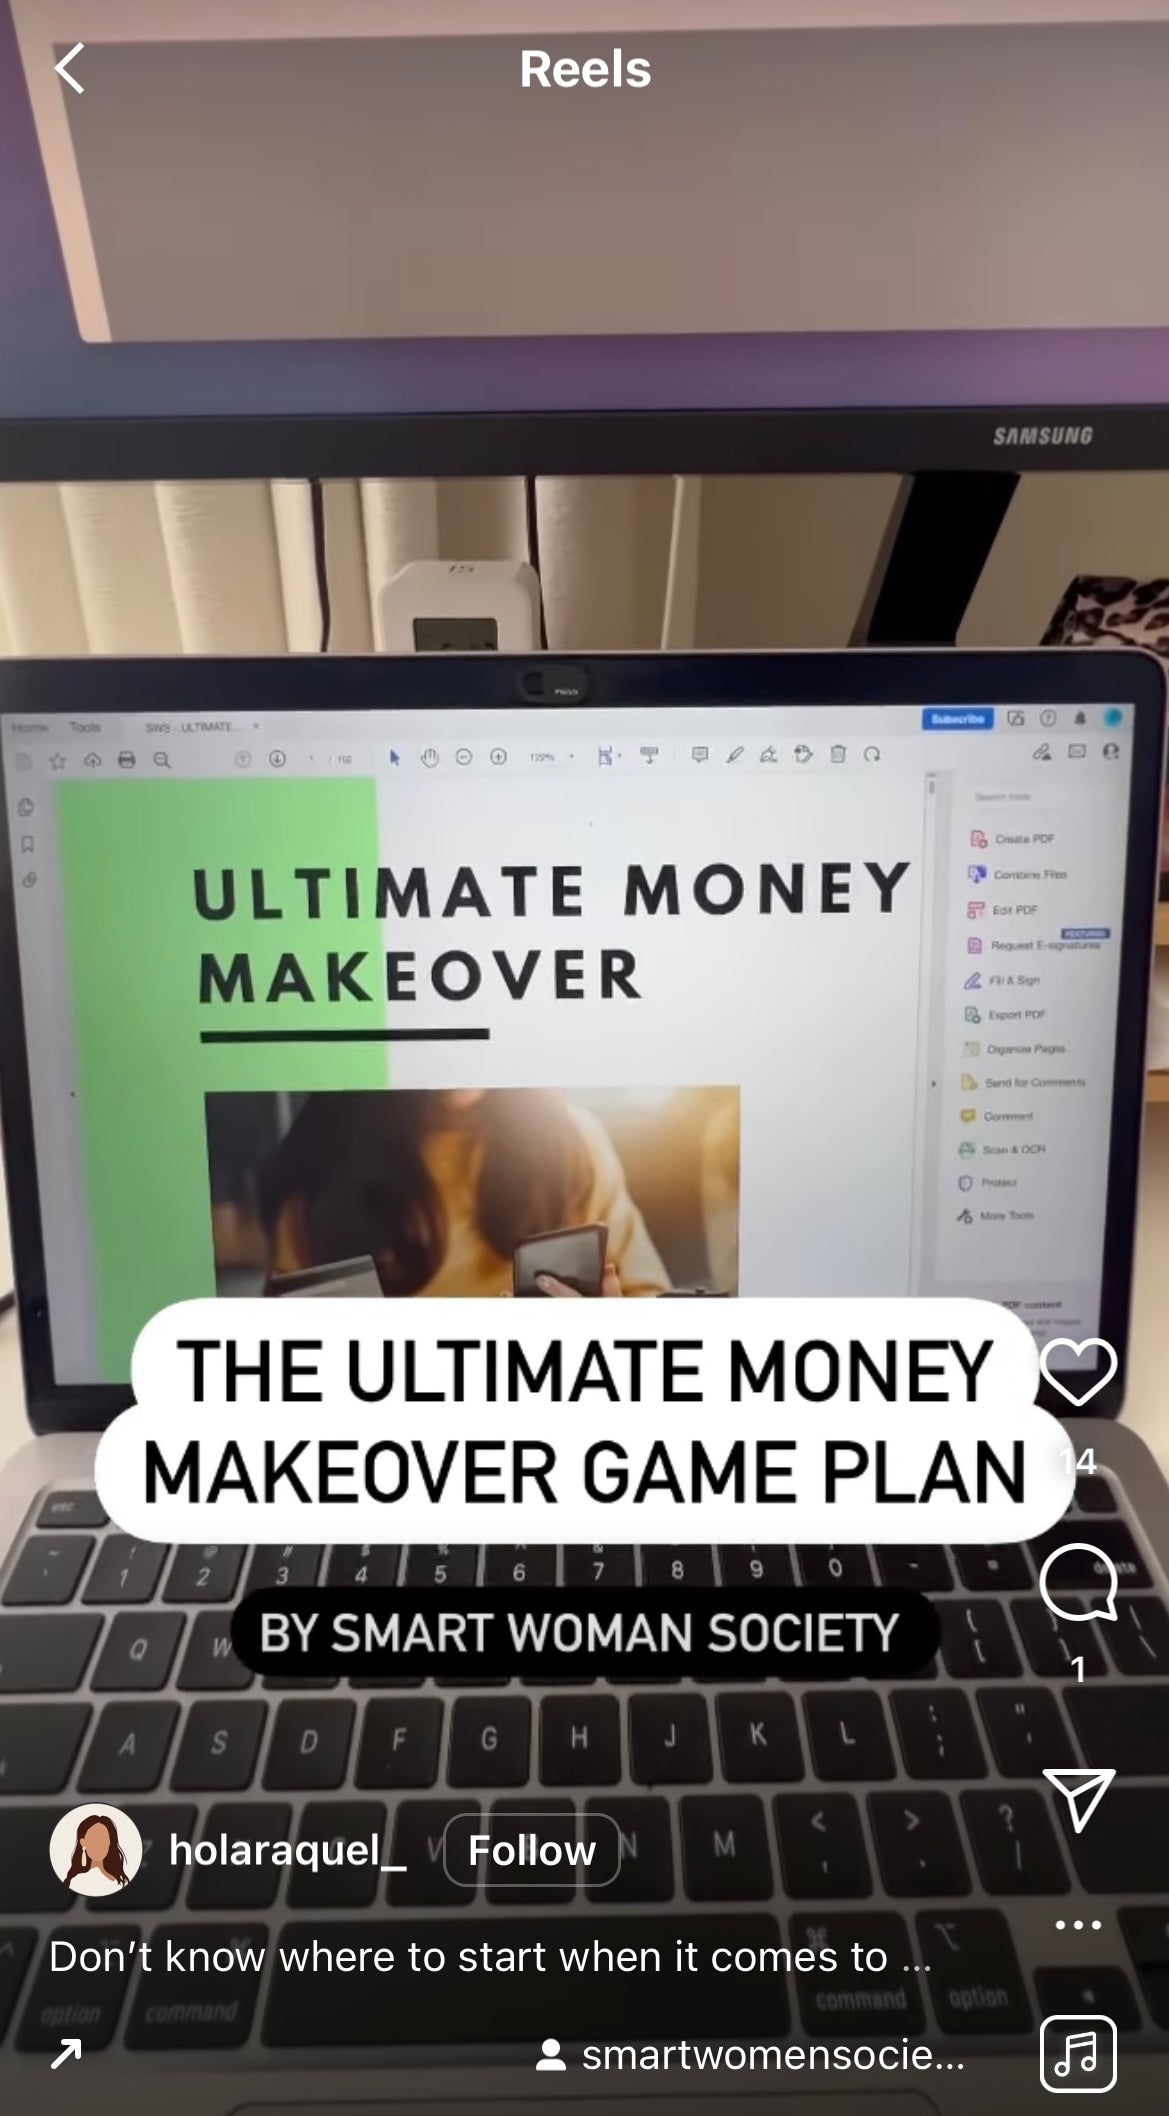 ULTIMATE MONEY MAKEOVER GAME PLAN